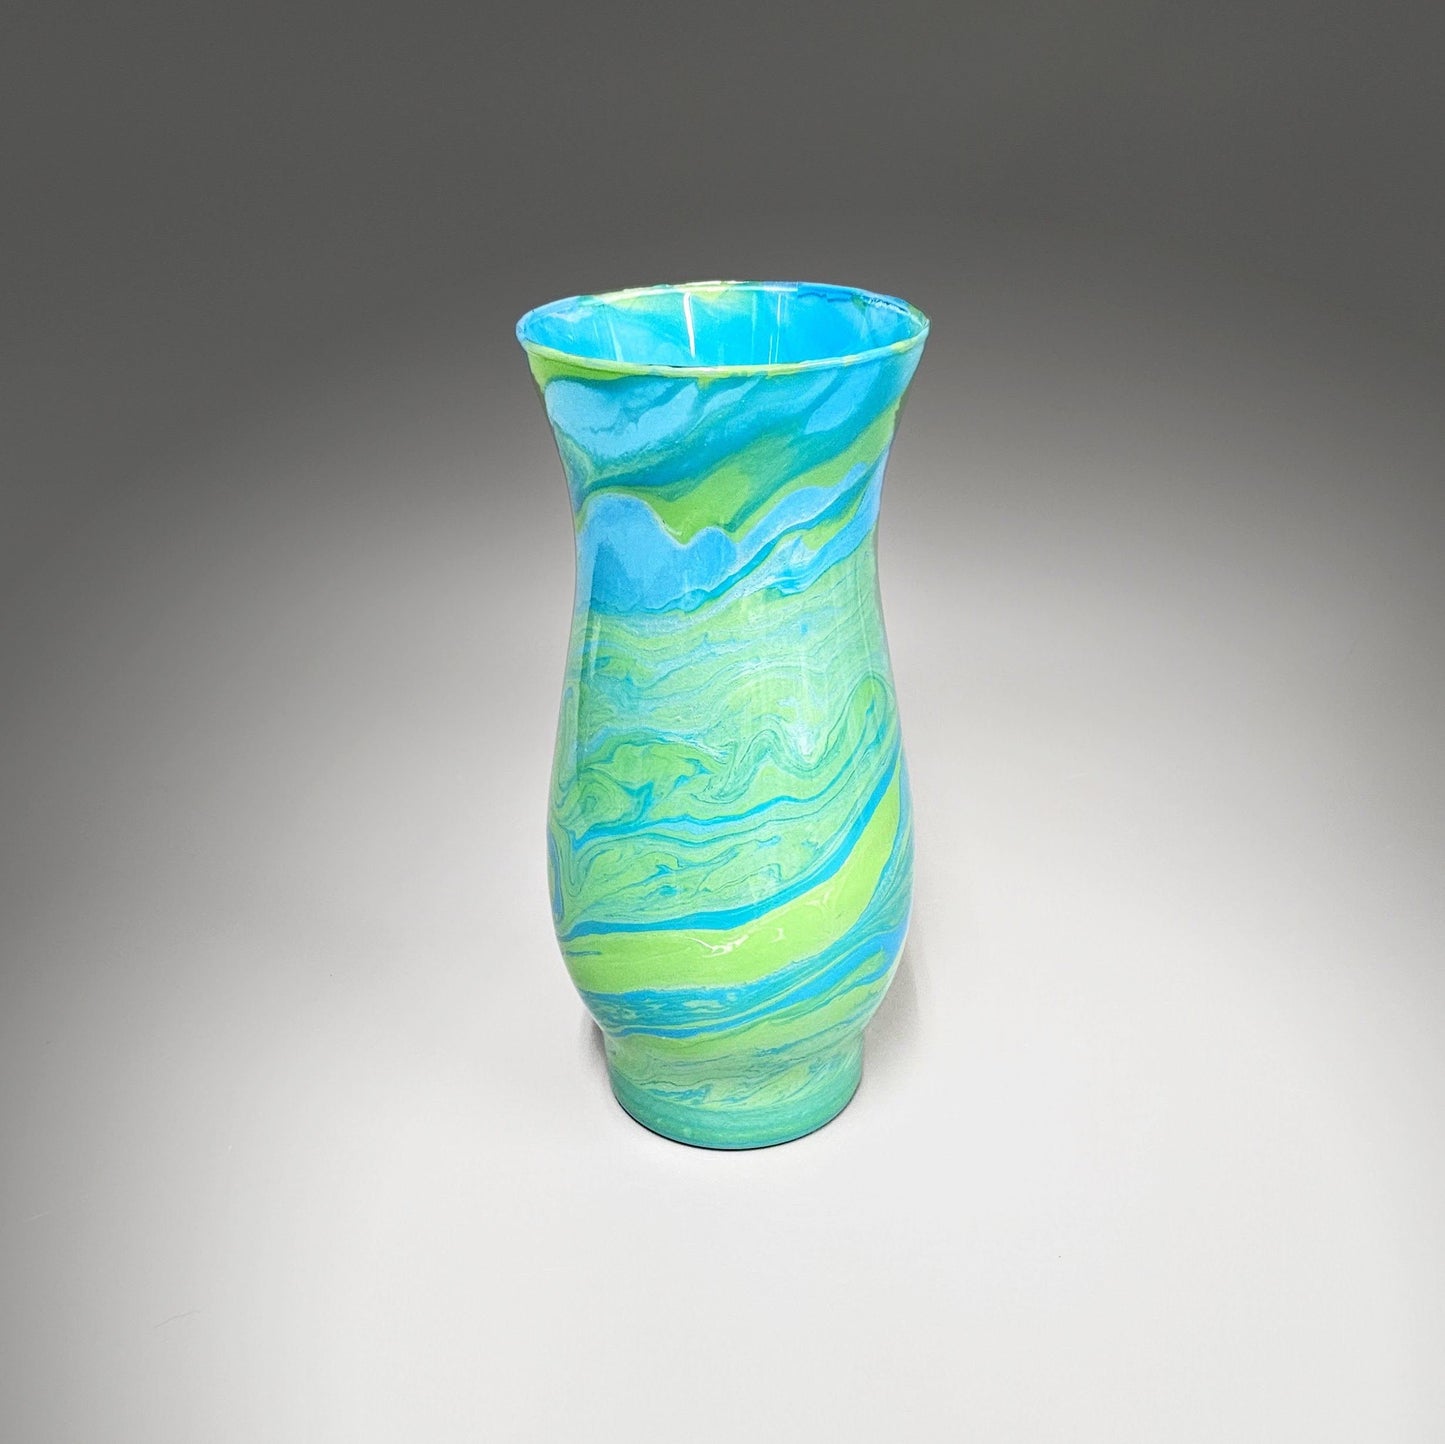 Flower Vase in Sky Blue and Bright Green